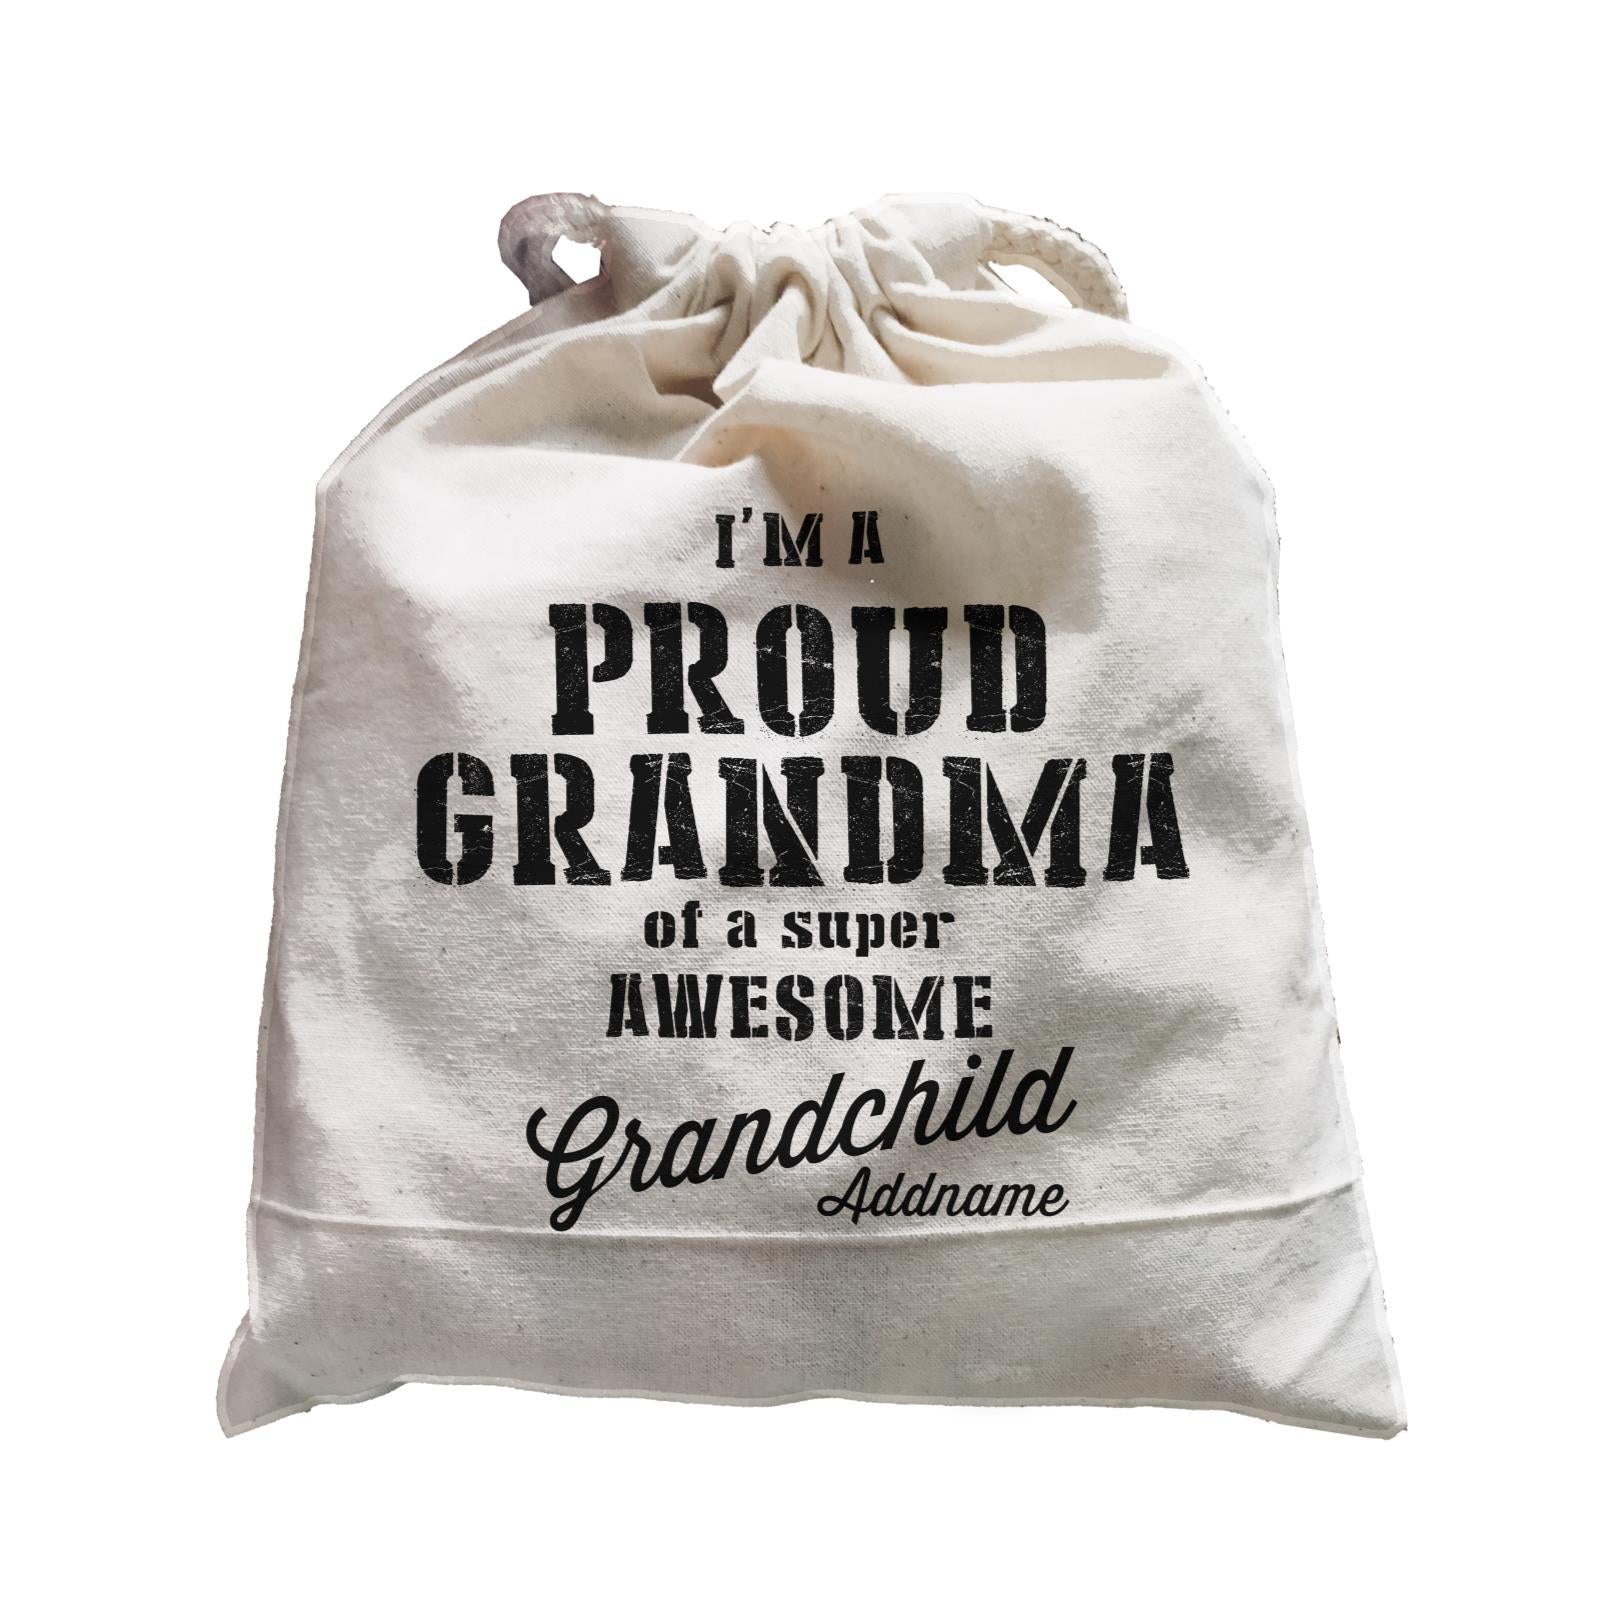 Proud Family Im A Proud Grandma Of A Super Awesome Grandchild Addname Satchel